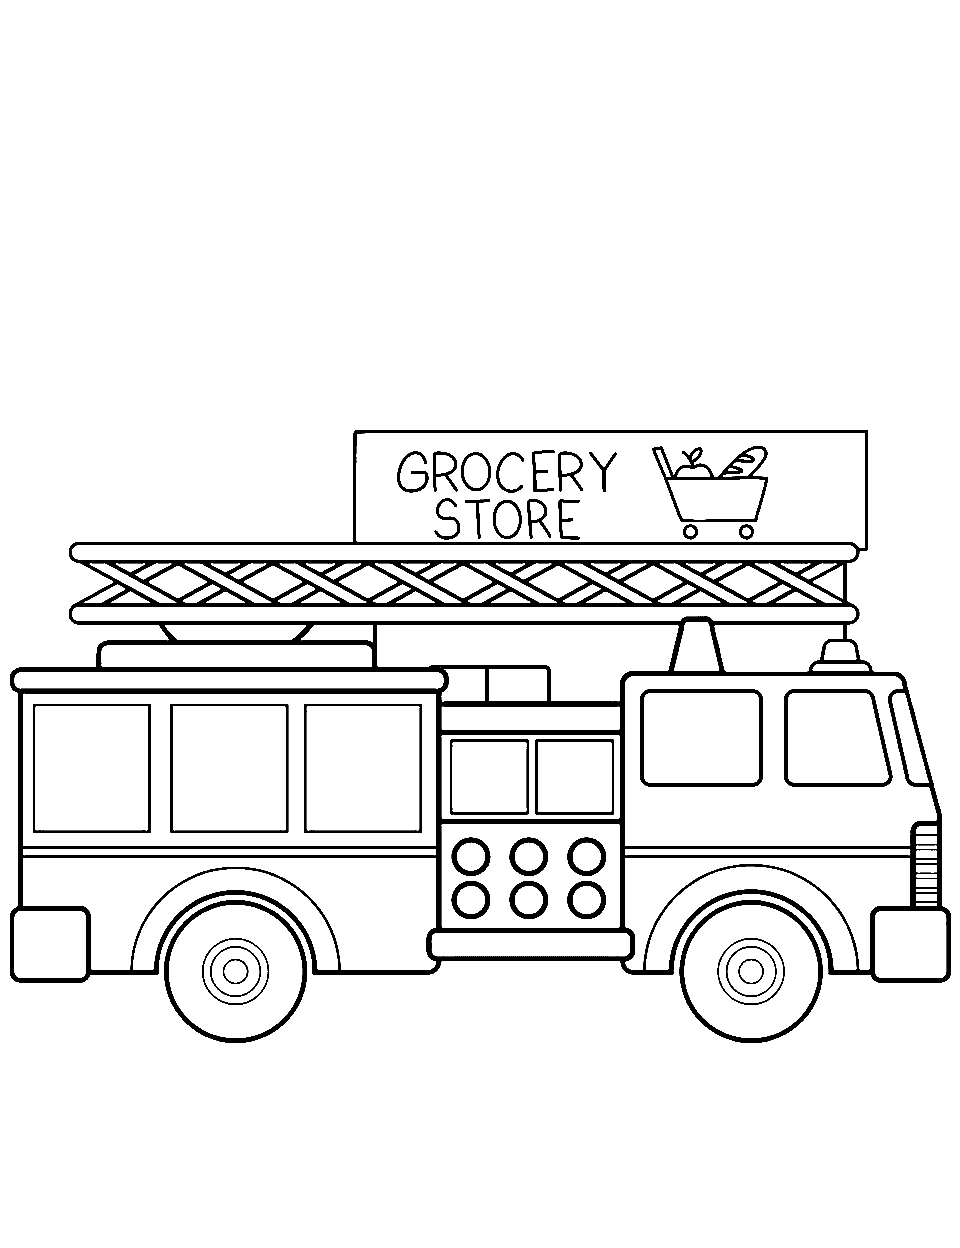 Fire Truck at the Grocery Store Coloring Page - A fire truck parked at a grocery store for a safety event.